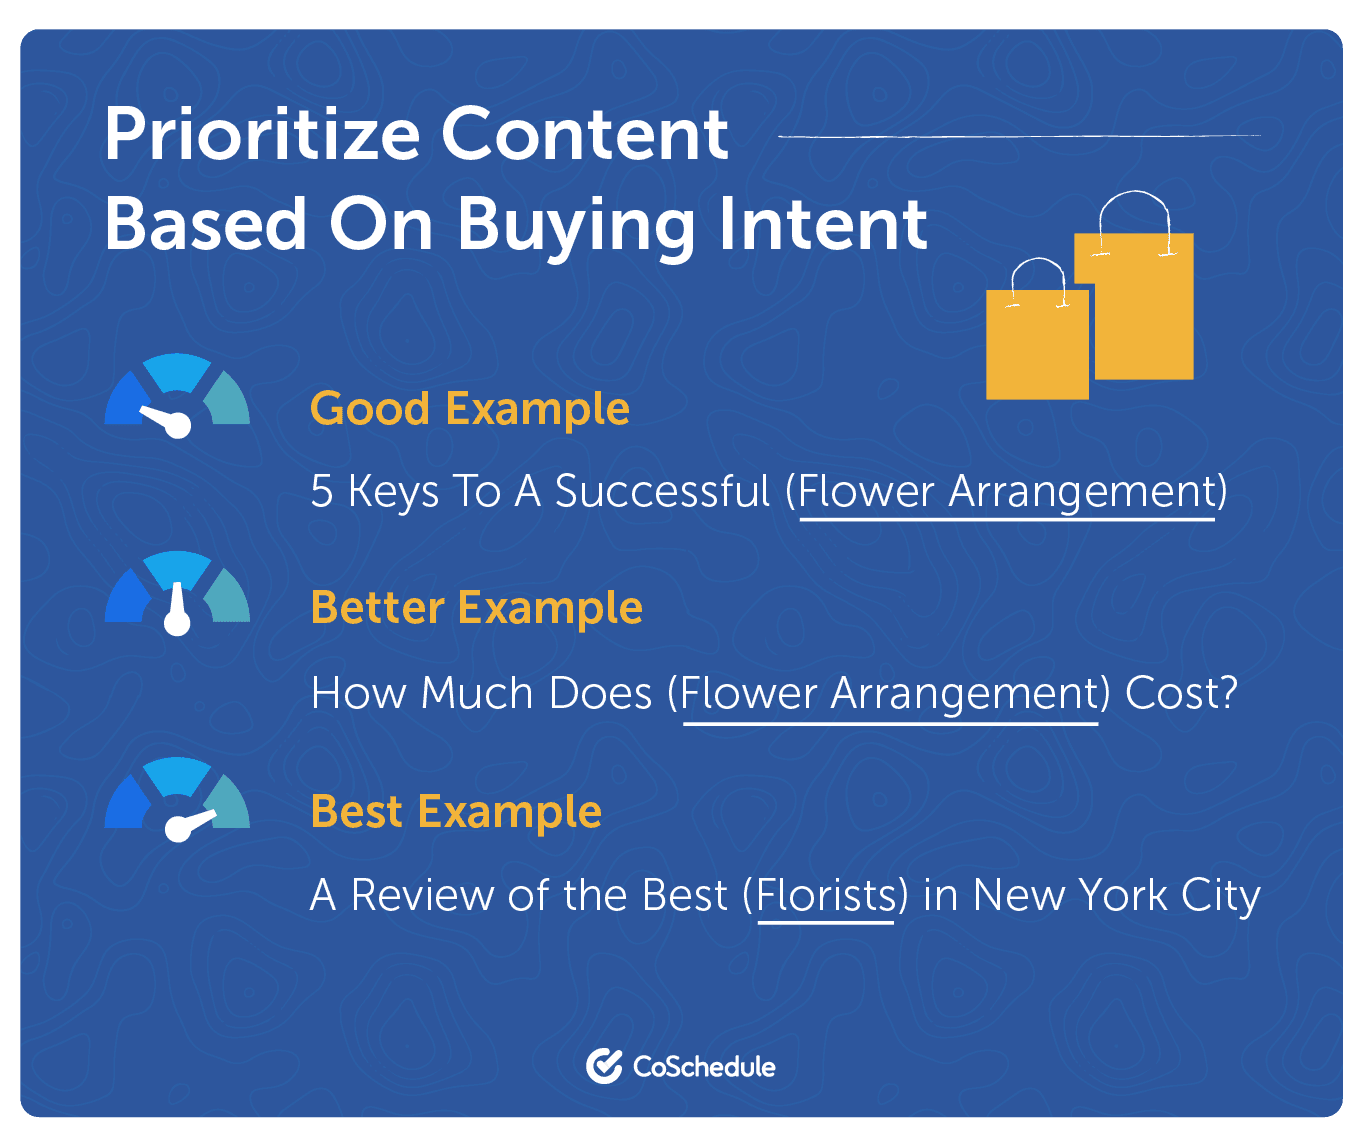 CoSchedule buying intent prioritization graphic